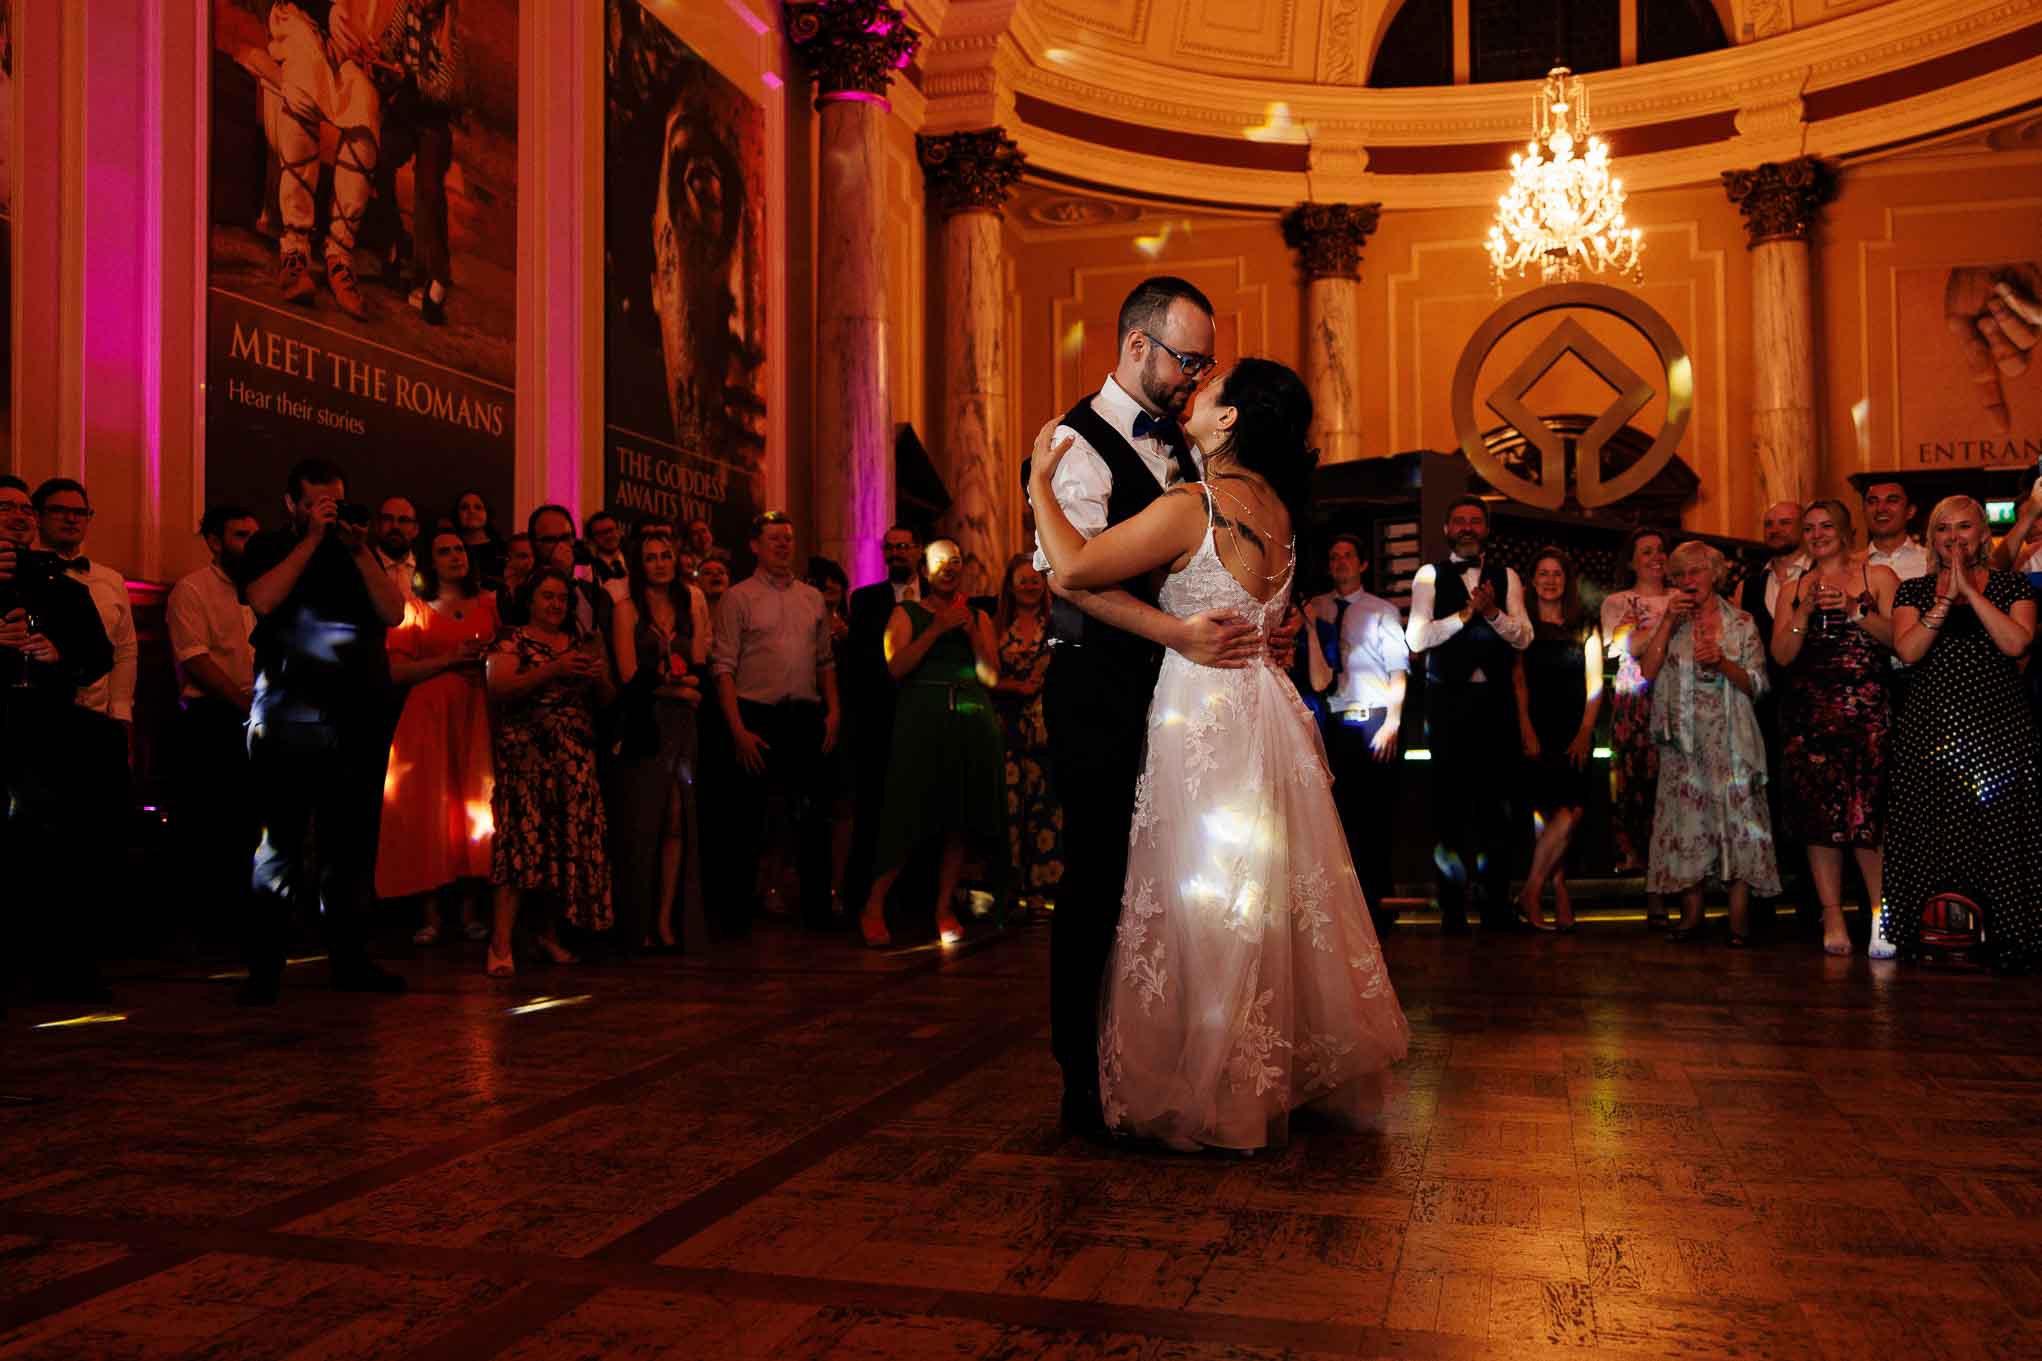 A wedding couple have their first dance in the Reception Hall